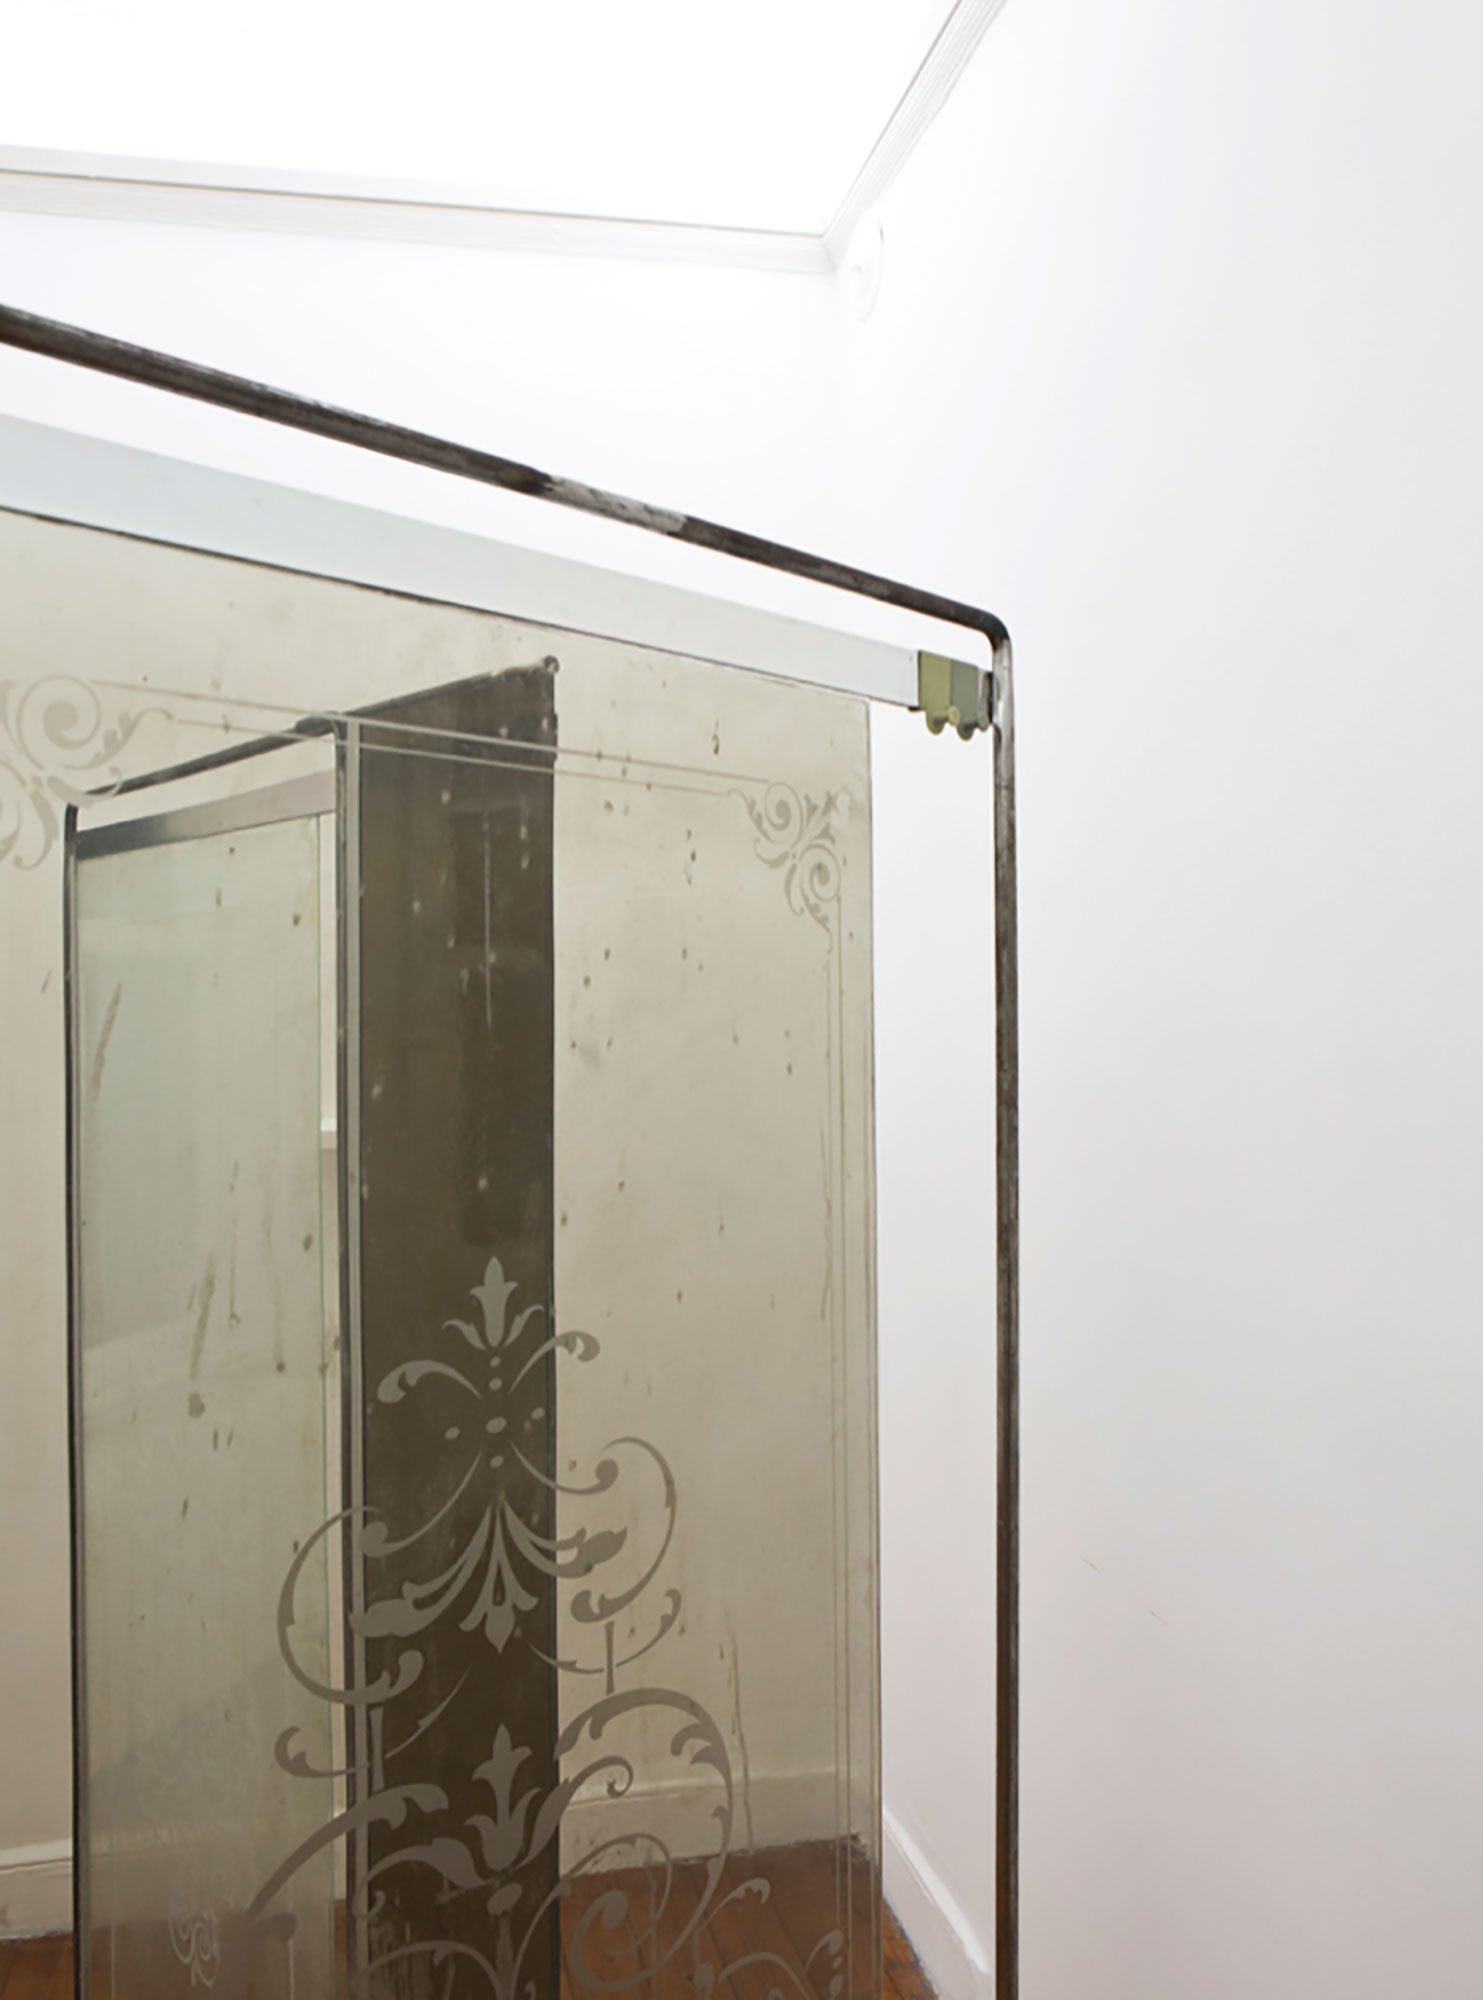 Eloise Hawser, Untitled, shower doors, steel frame, 2013. Installation view, Burn These Eyes Captain, And Throw Them In The Sea!!, Rodeo, Istanbul, 2013 – 2014